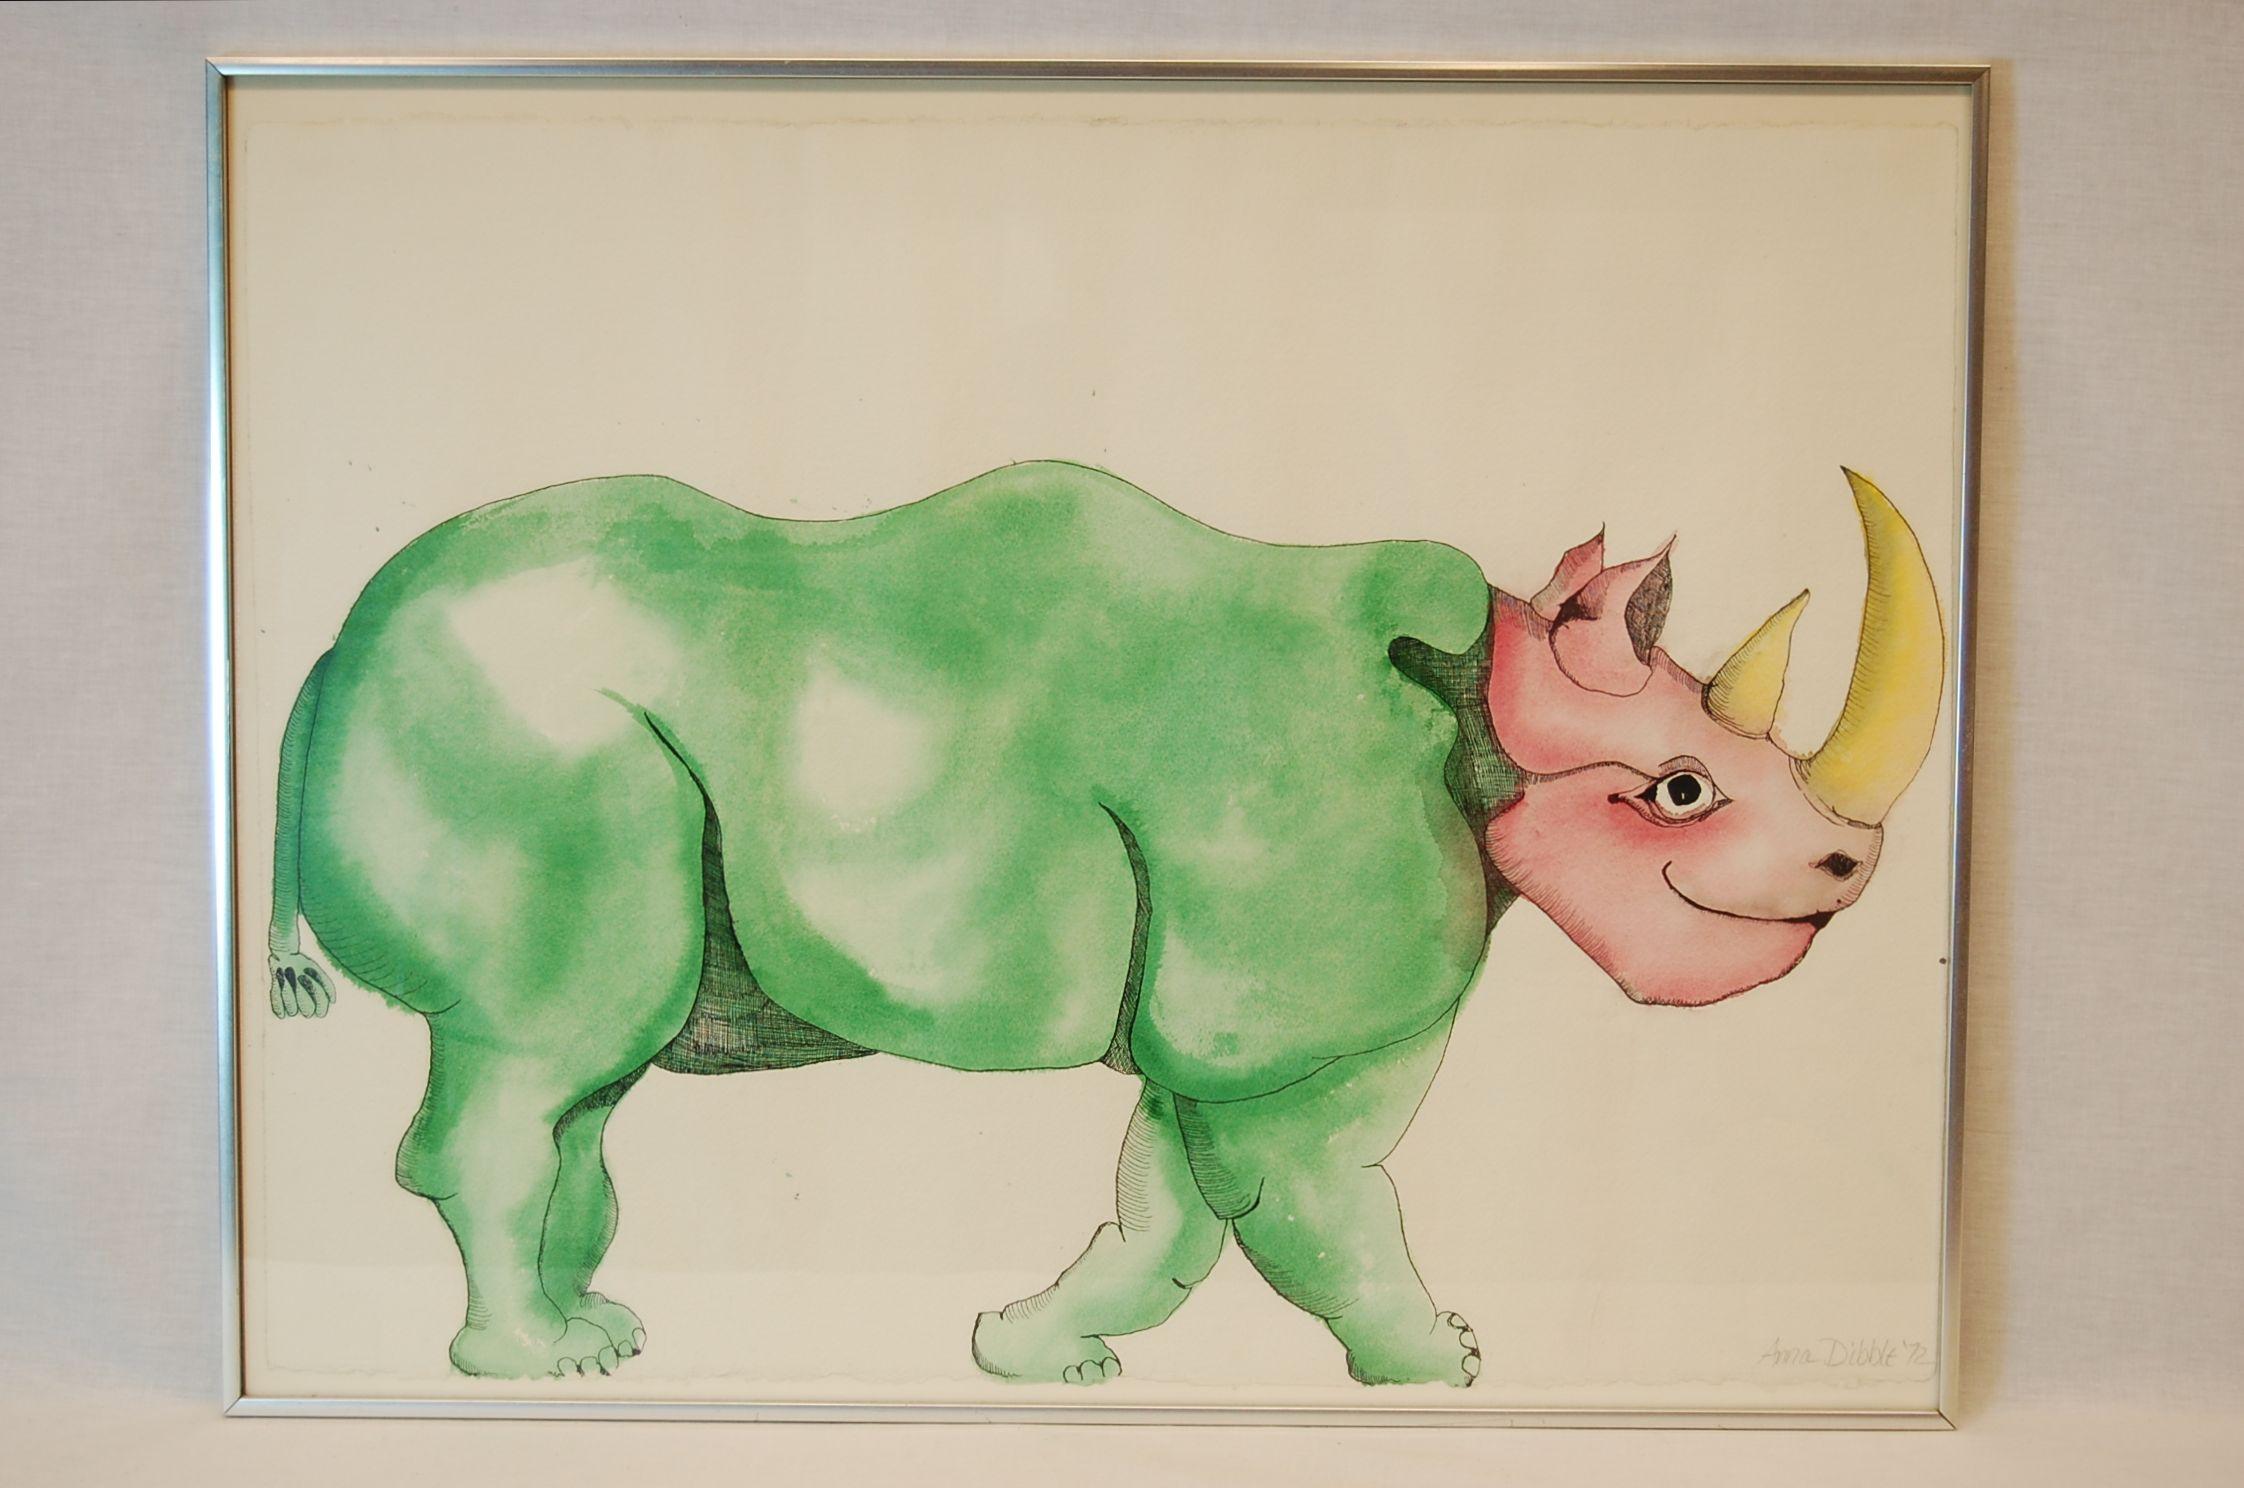 Hand-Painted Watercolor of Rhinoceros by Anna Dibble, 1972, Signed and Framed